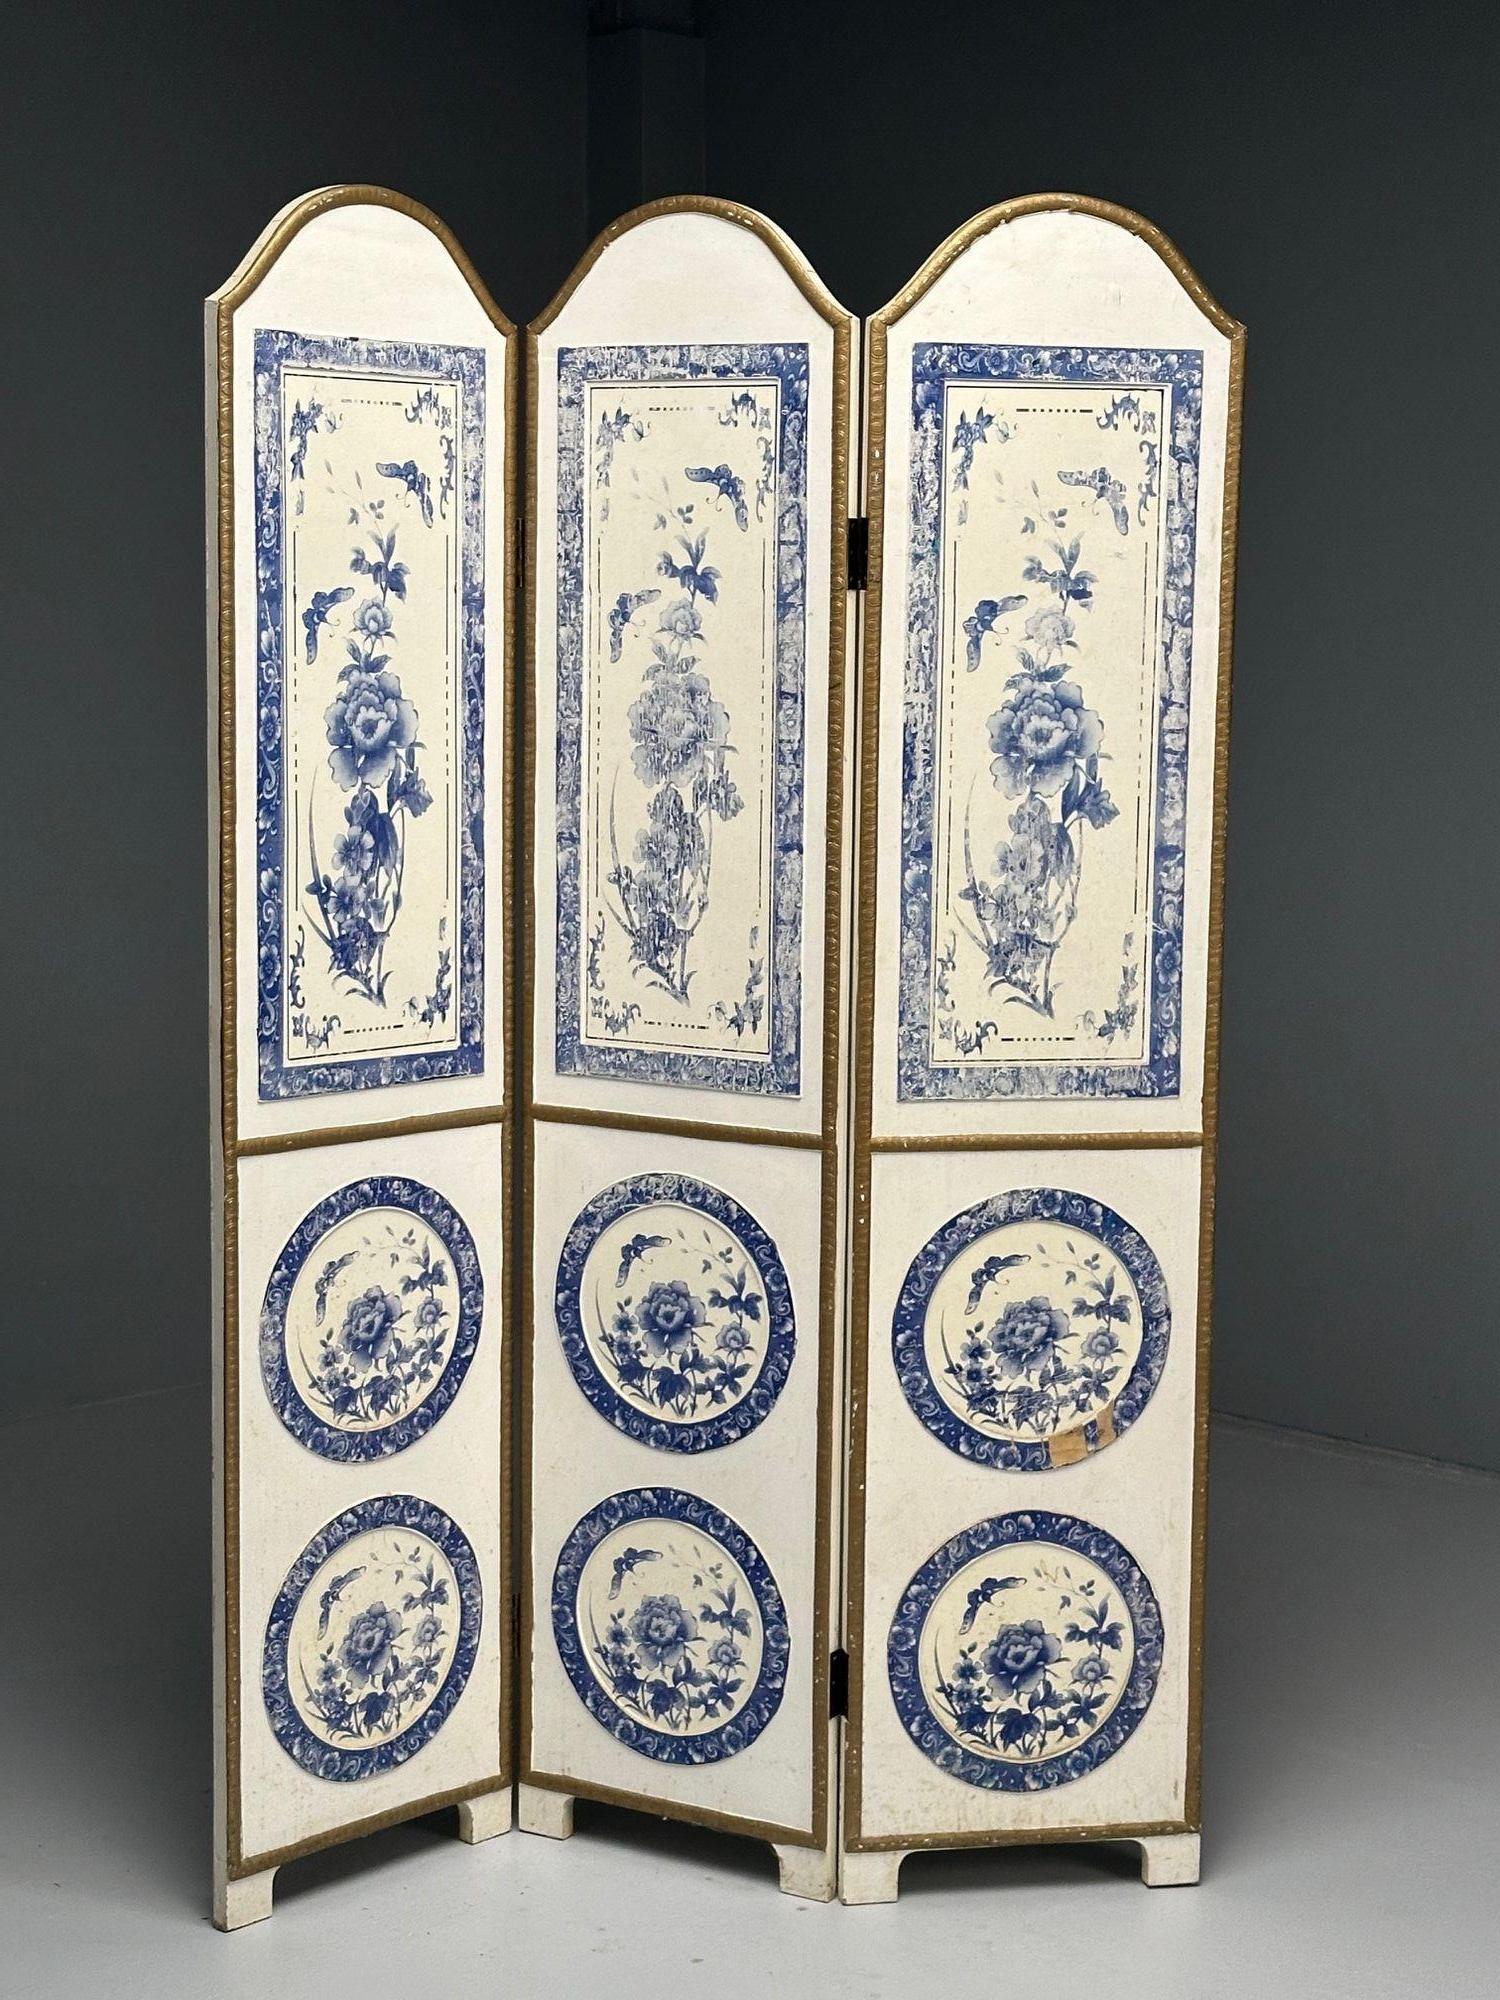 Wood Italian, Chinoiserie, Room Dividers, Screens, Blue and White, Floral Motif, Gilt For Sale